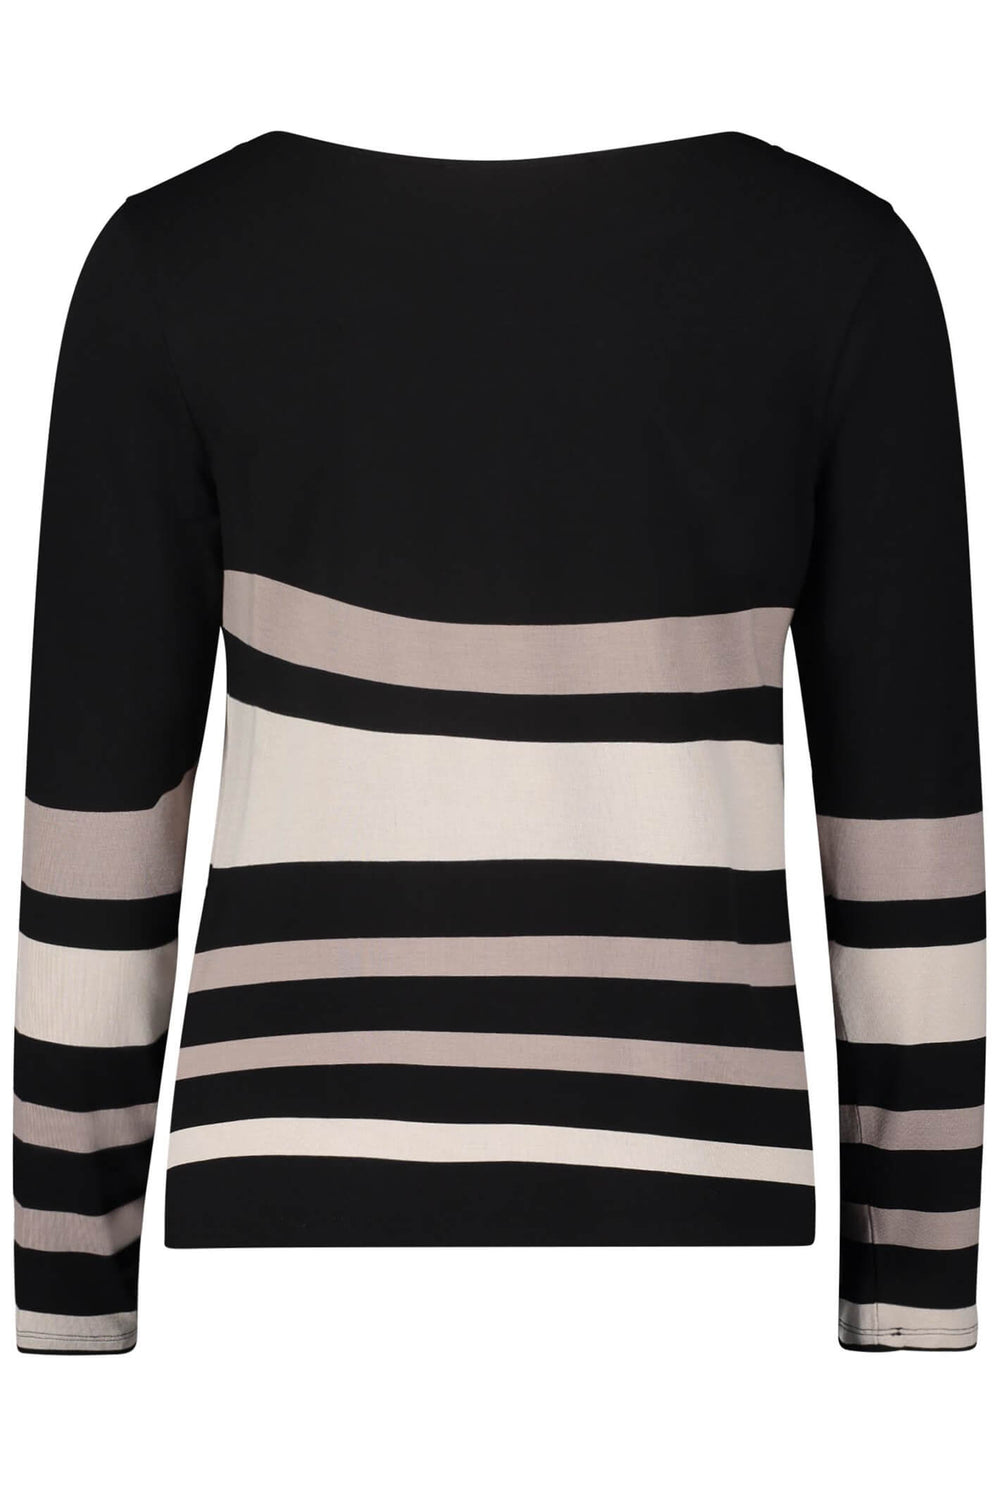 Betty Barclay 2894 2312 9875 Black Beige Striped Long Sleeve Top - Dotique Chesterfield